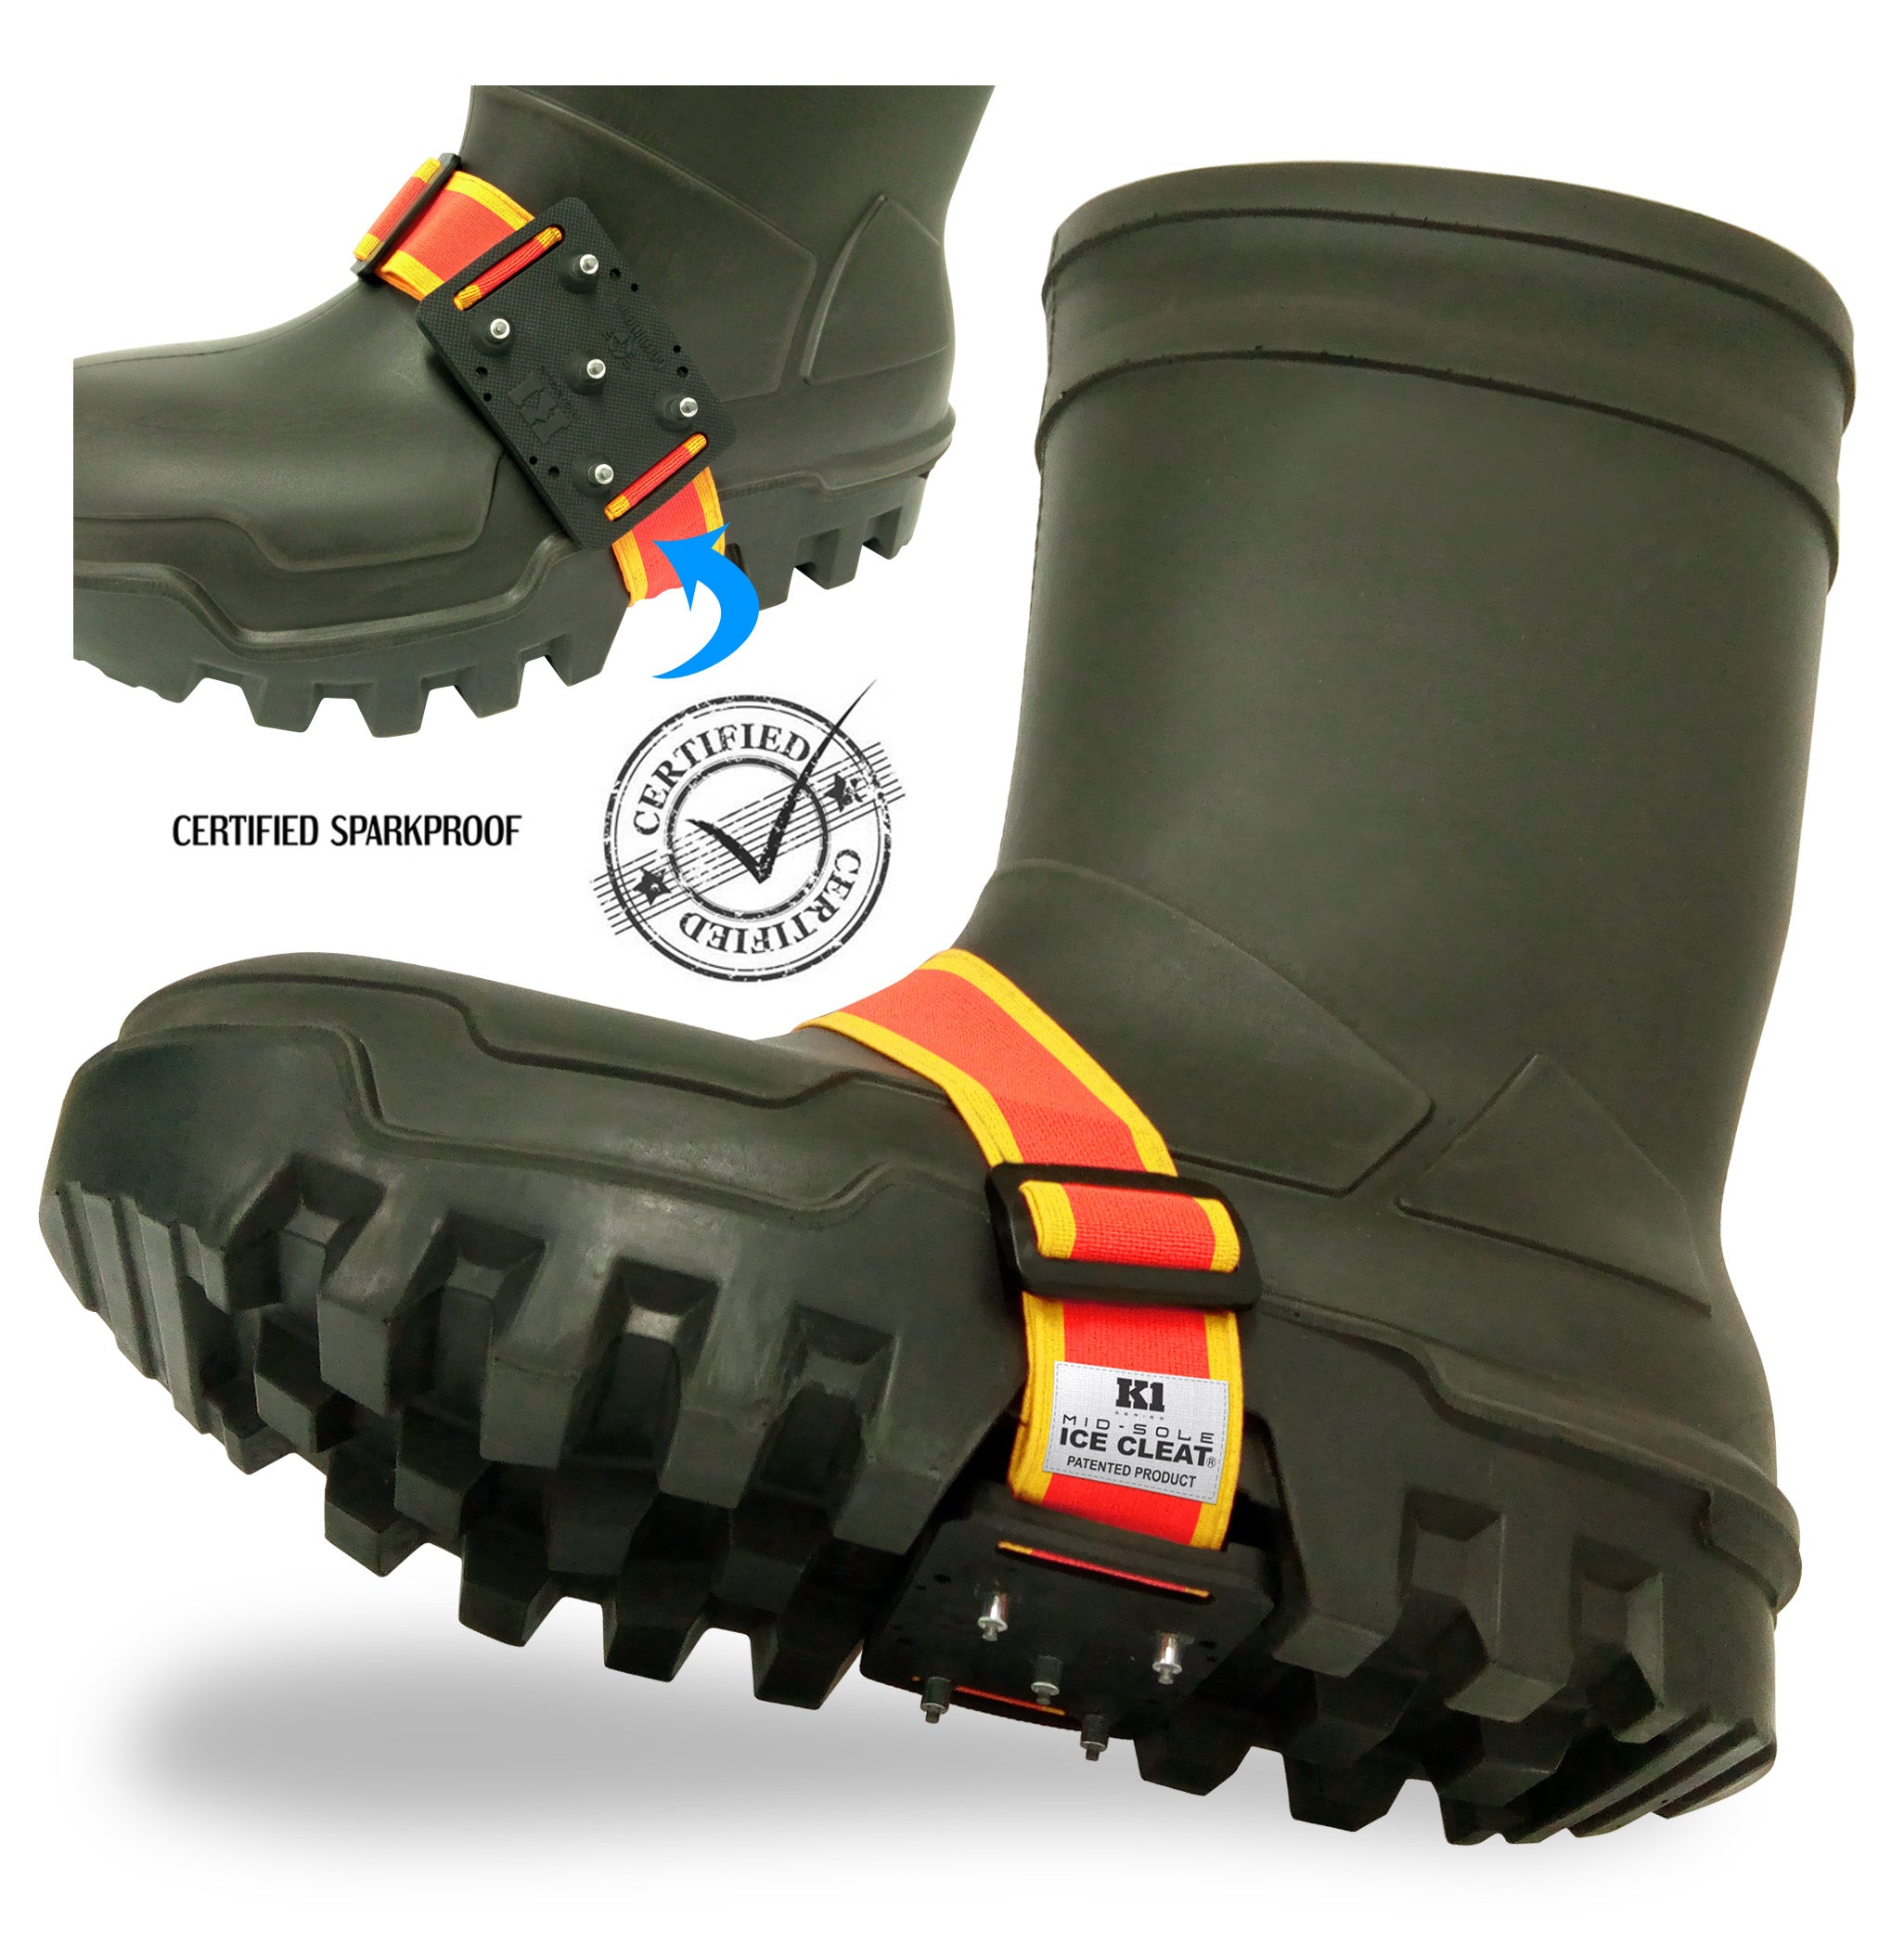 K1 Series Mid-Sole Intrinsically Safe High Profile Ice Cleat (For Deep Tread Boots) Work Boots - Cleanflow